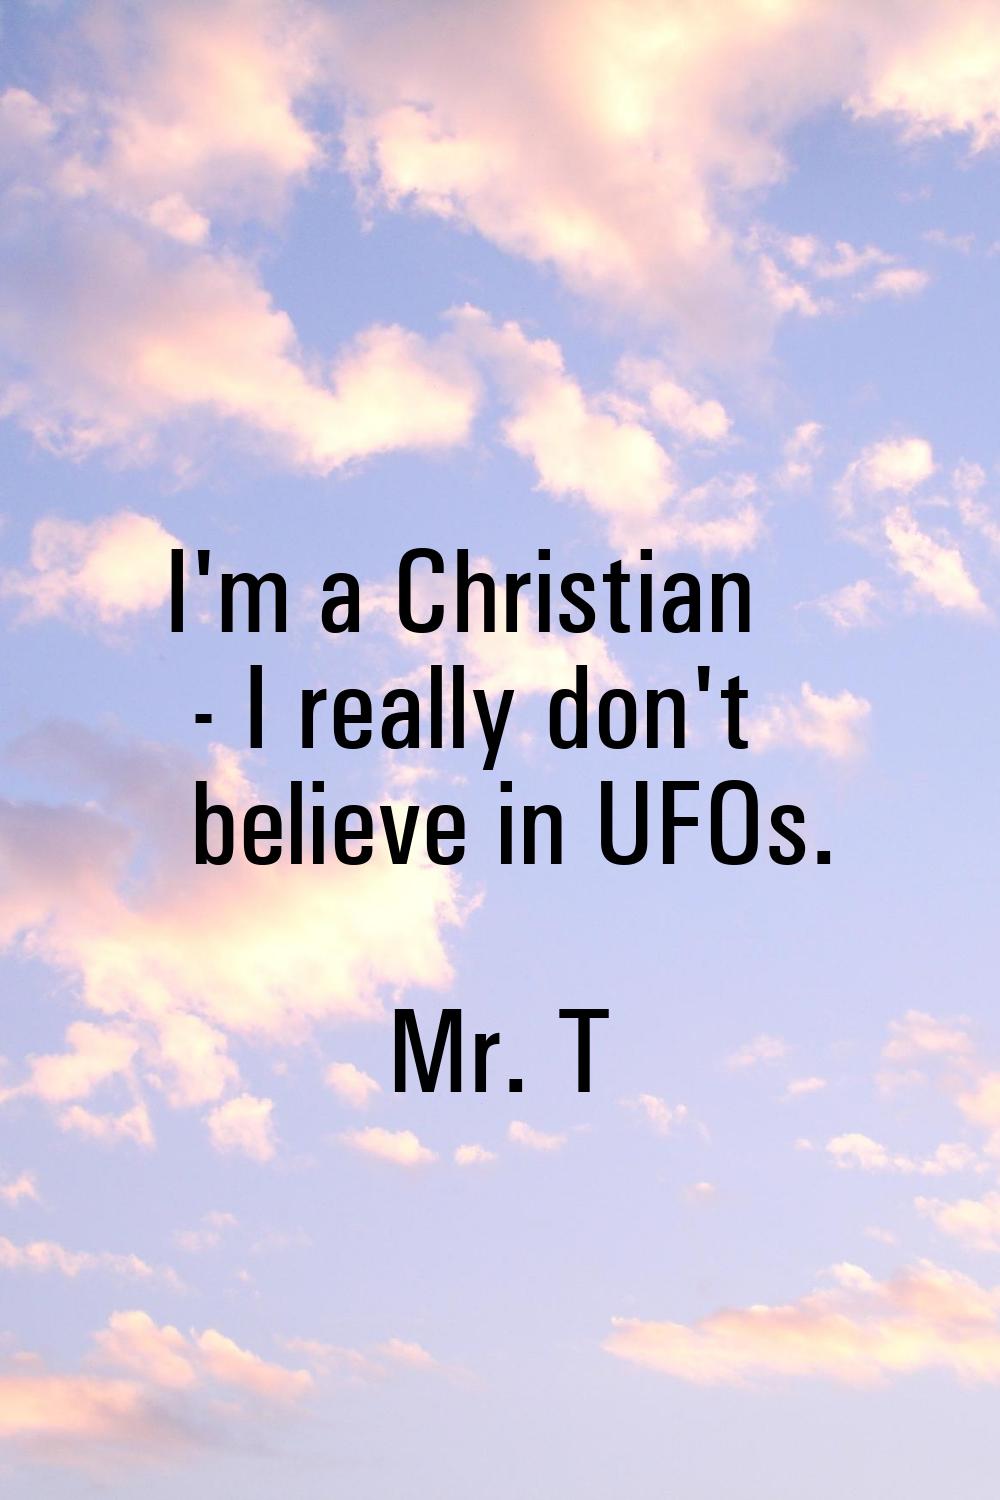 I'm a Christian - I really don't believe in UFOs.